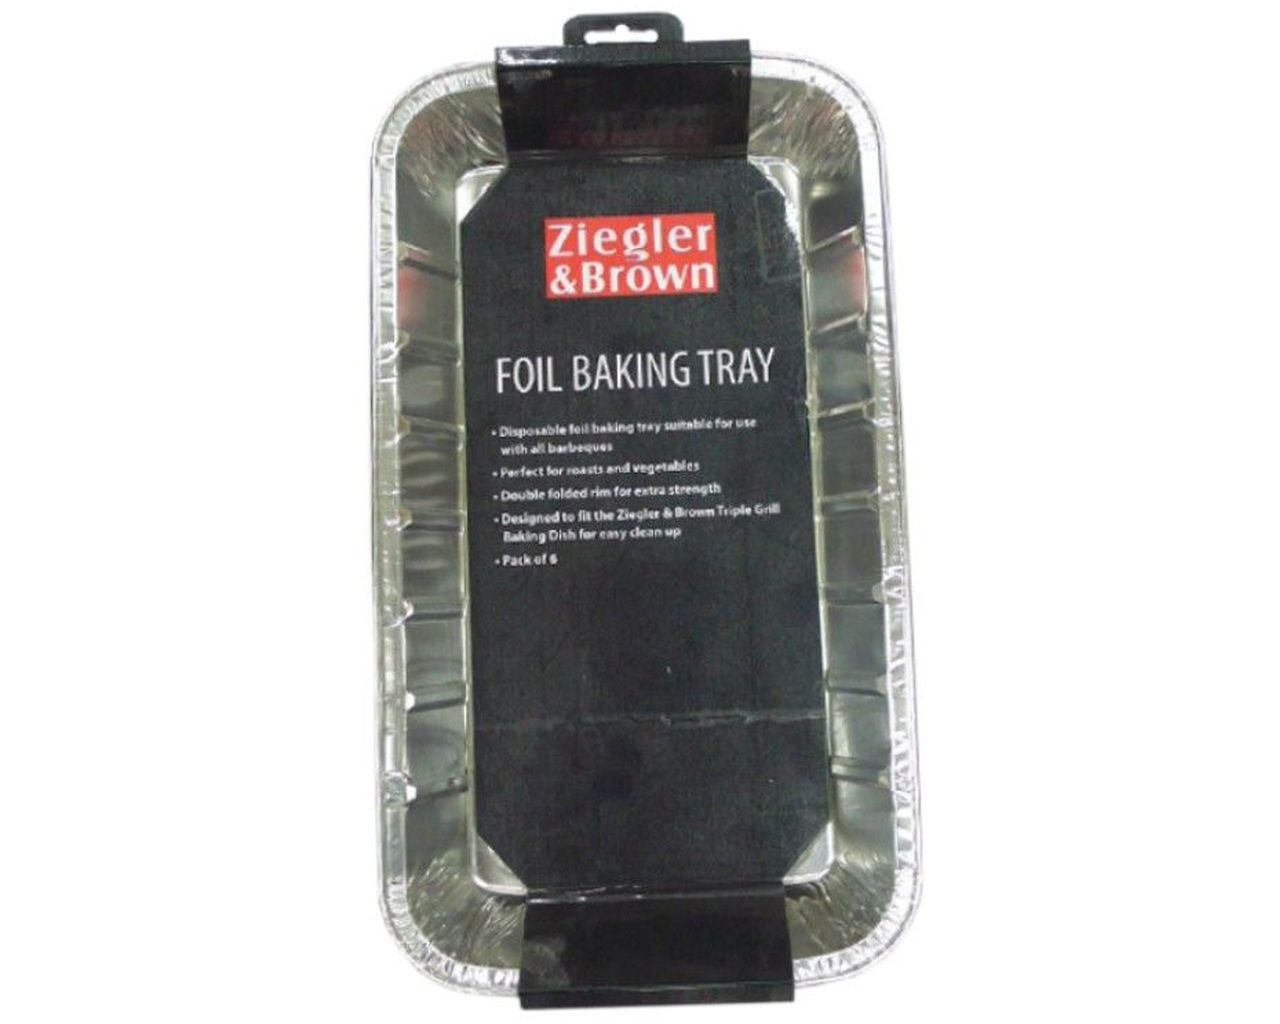 Ziegler & Brown 6pk Foil Baking Tray, , hi-res image number null